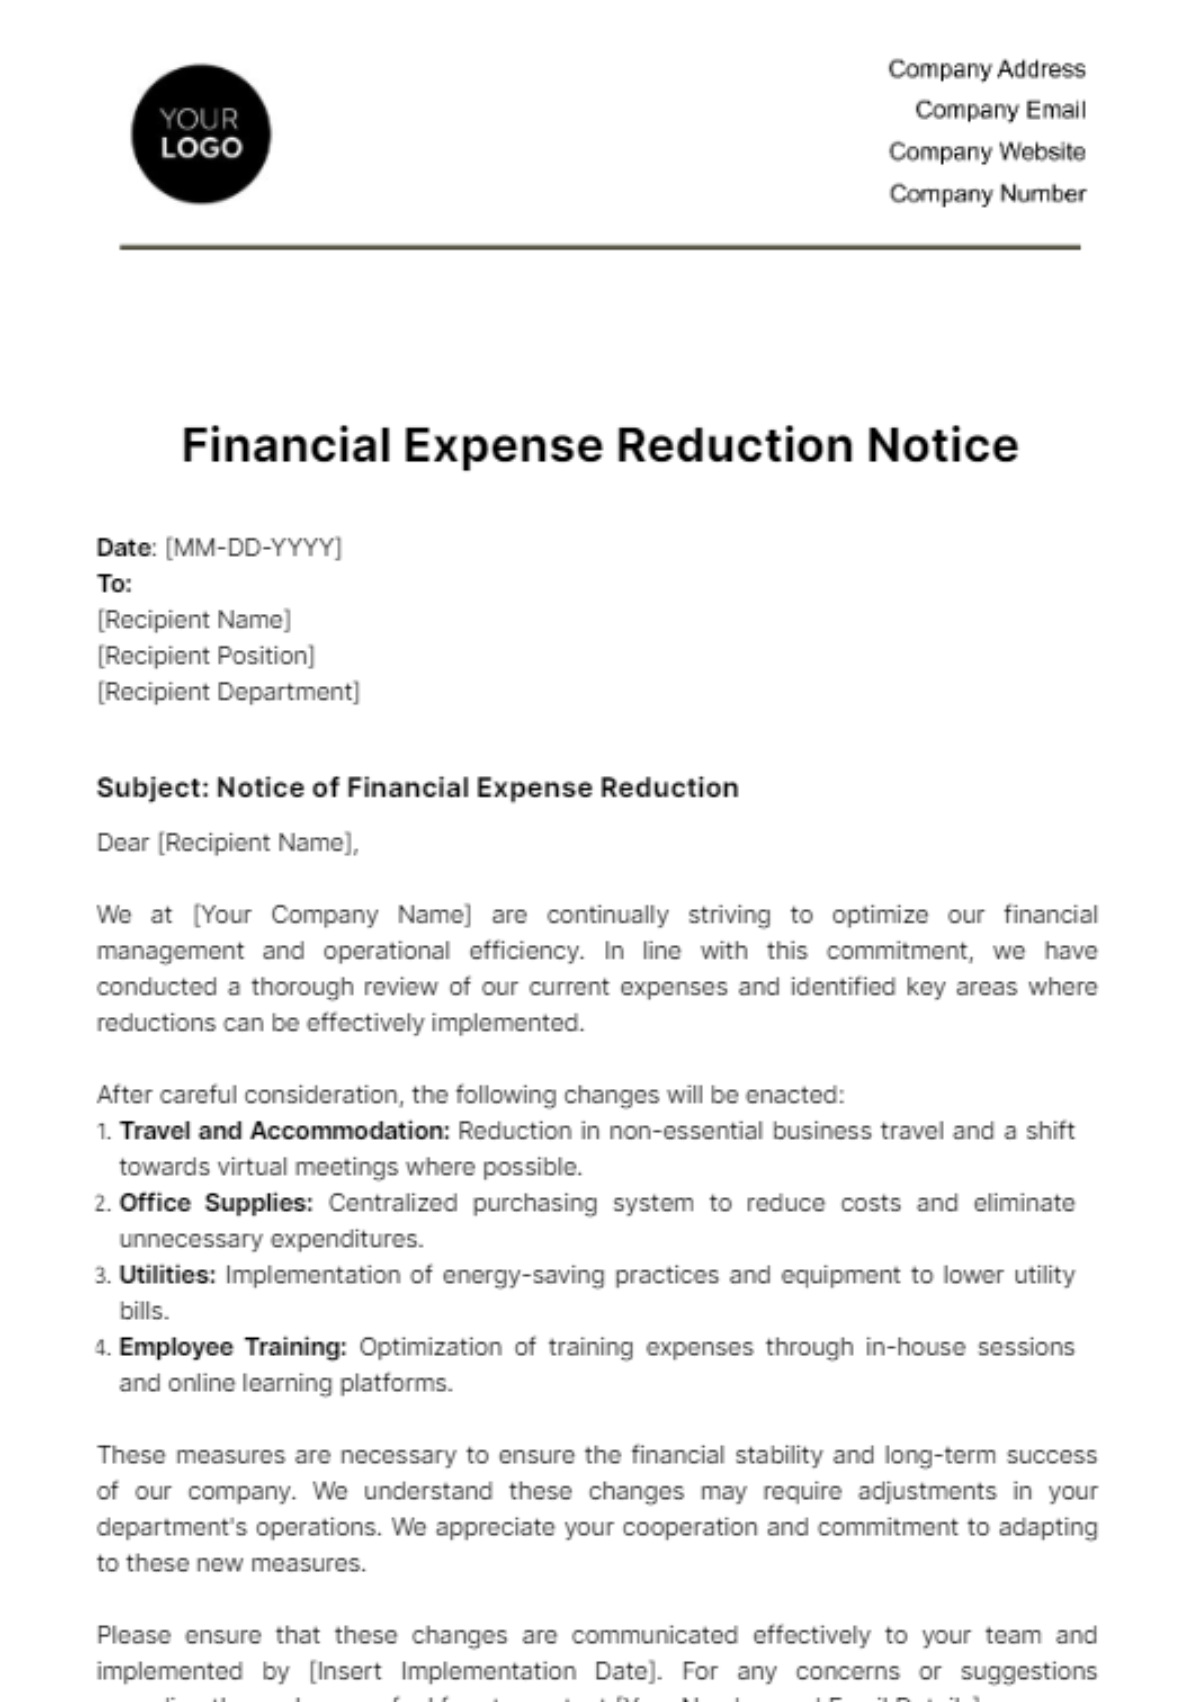 Financial Expense Reduction Notice Template